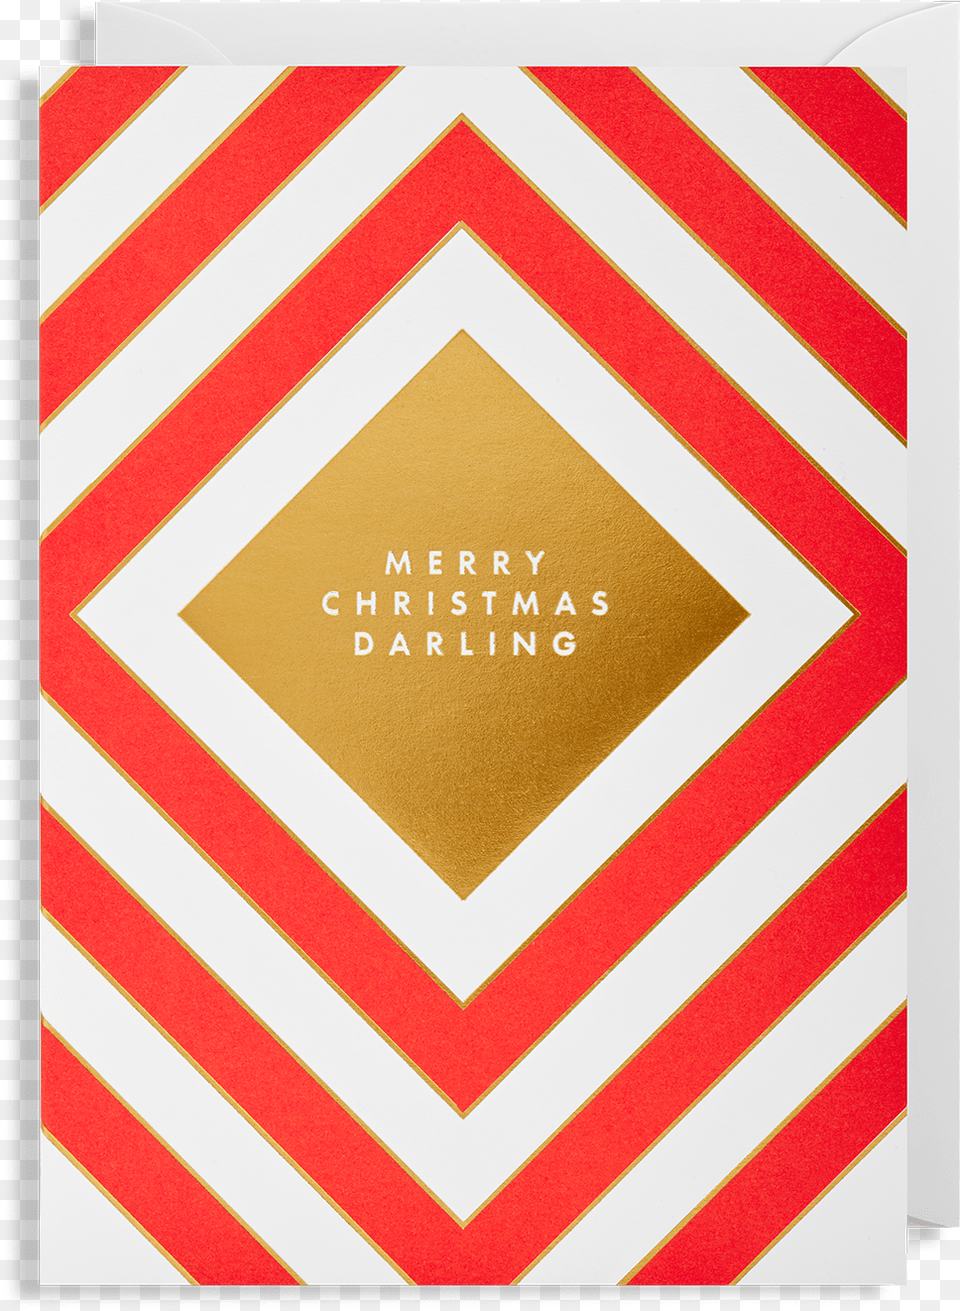 Merry Christmas Darling Christmas Card Symmetrical Wall Design, Advertisement, Poster Free Transparent Png